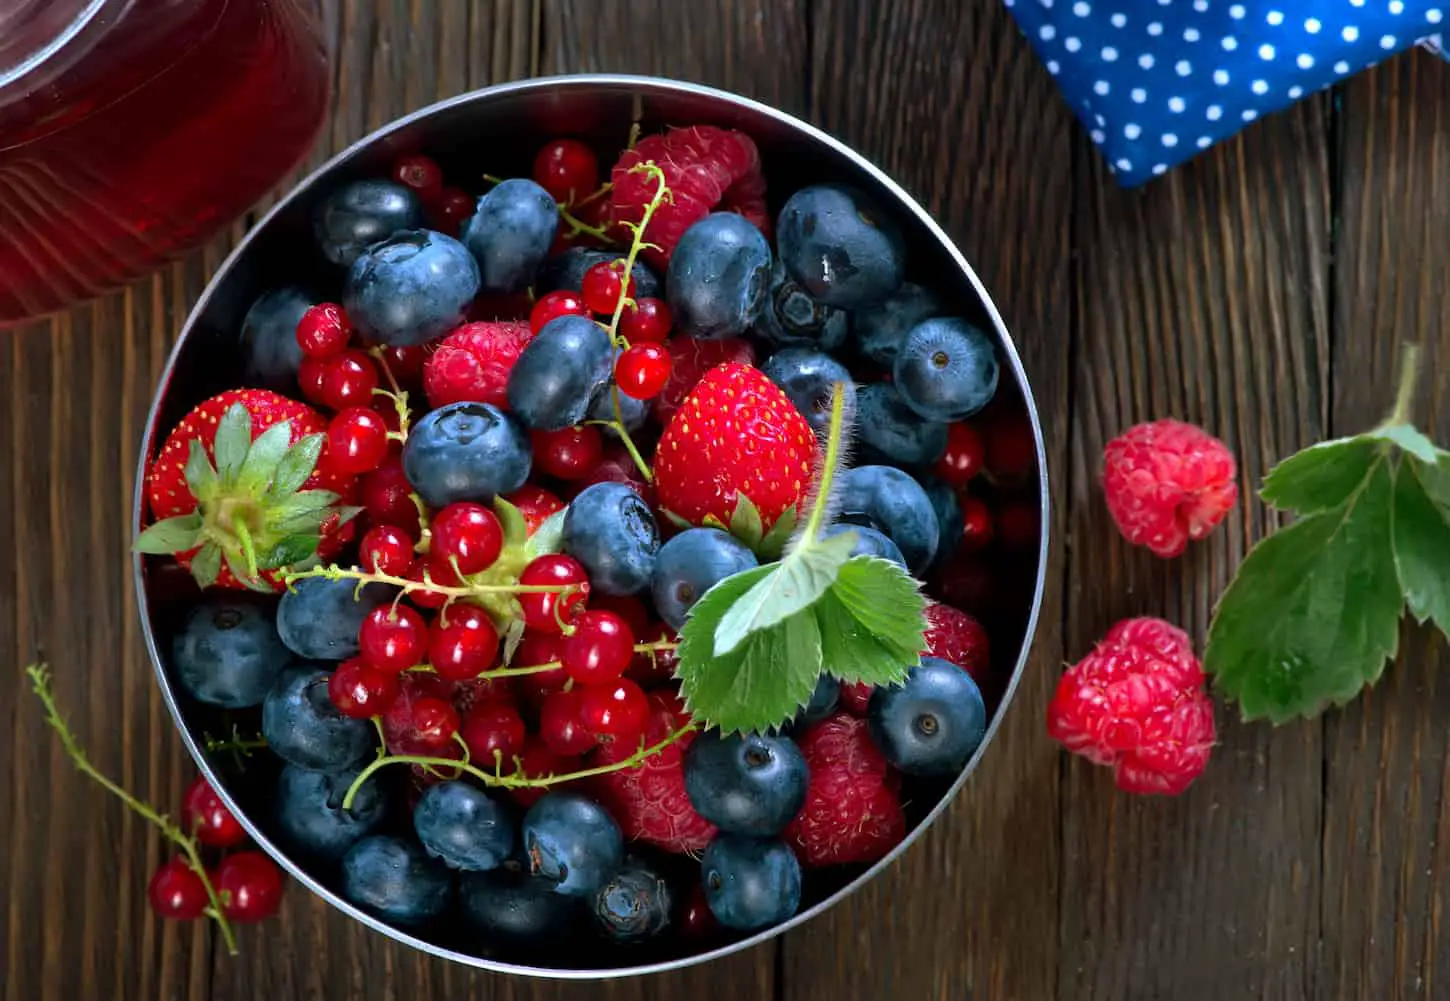 An image of fresh berries in a bowl and on a table.